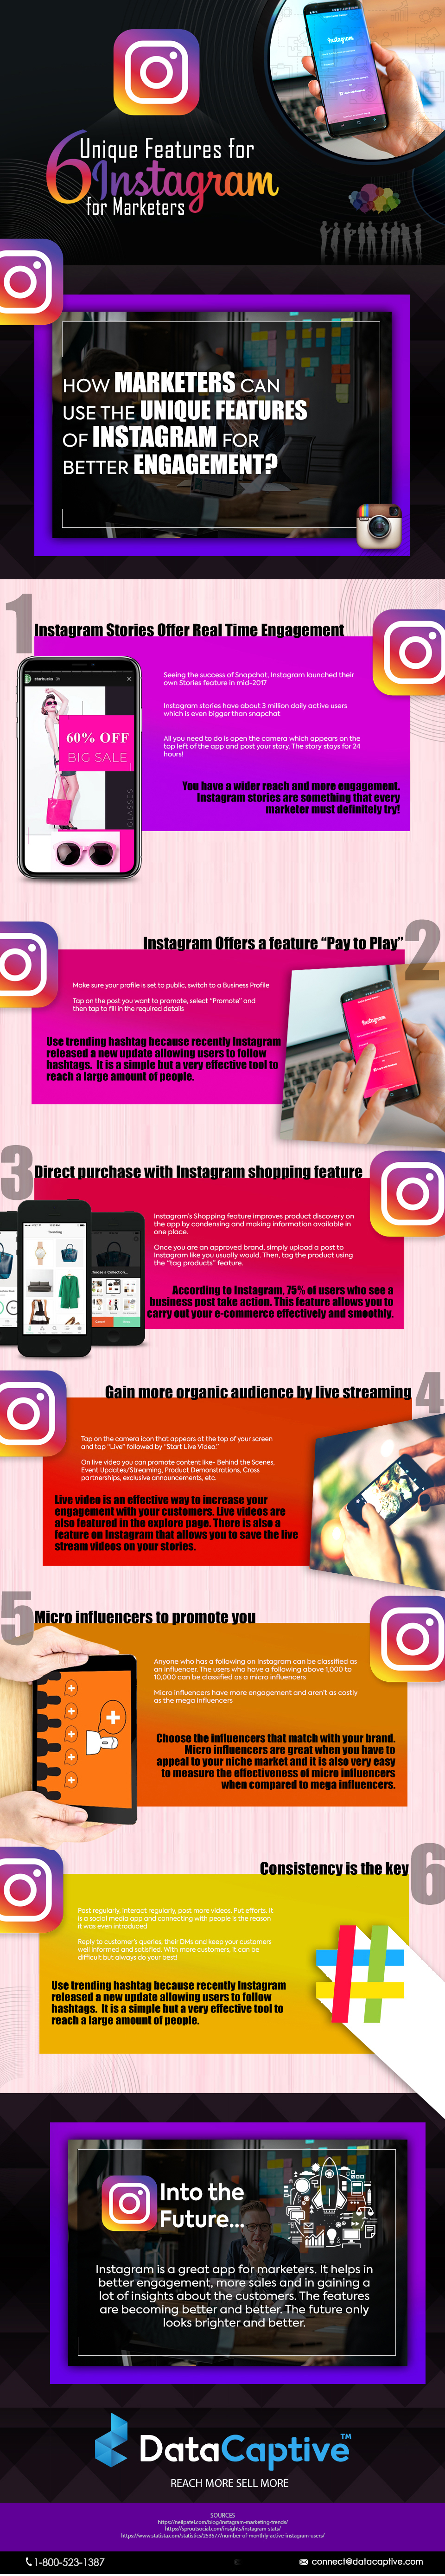 6 Unique features for instagram for marketers - DataCaptive Infographic